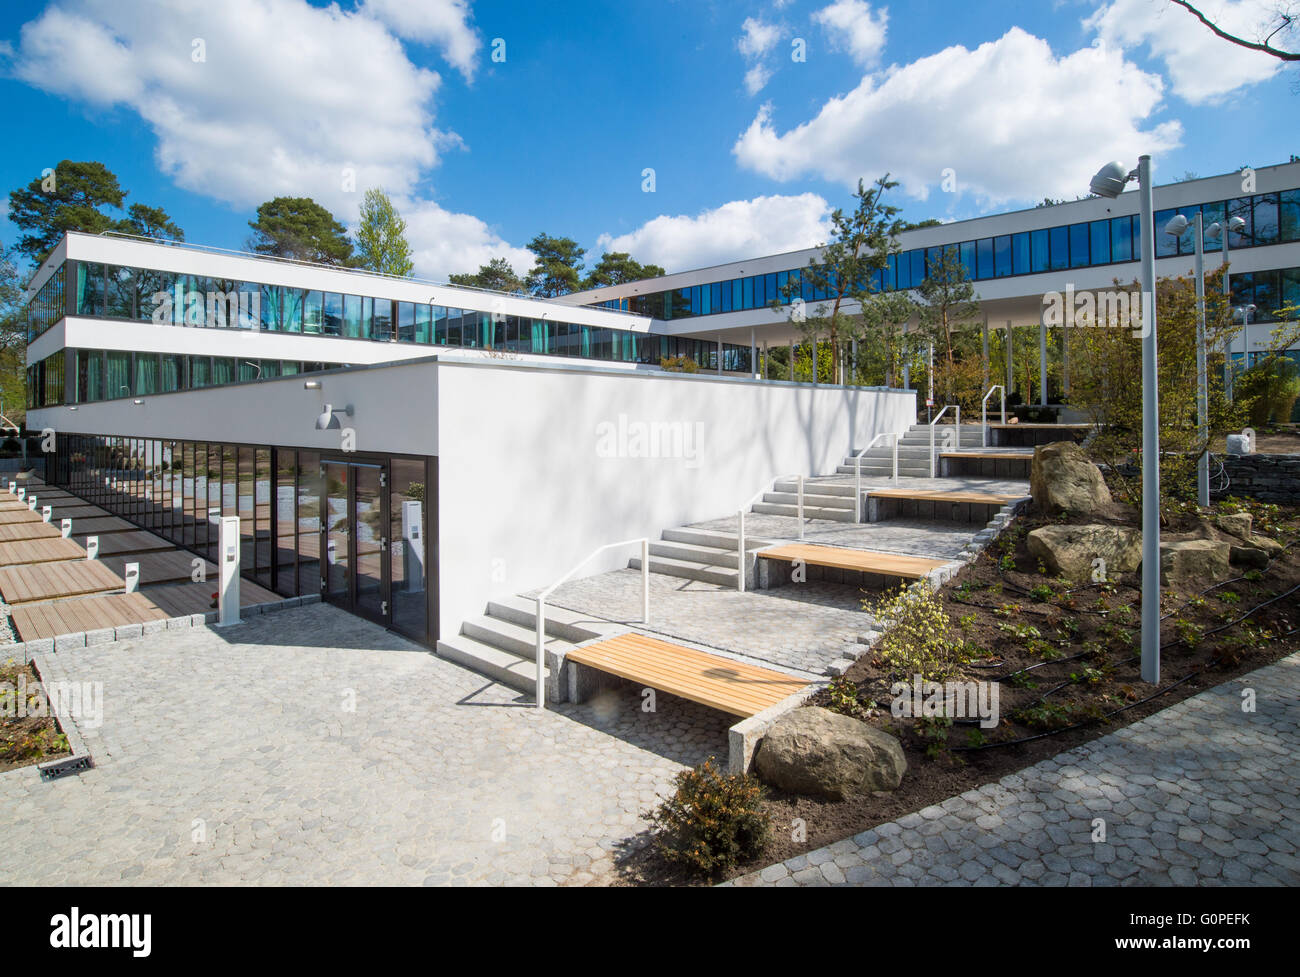 Exterior view of the newly erected Sukhavati Spiritual Care Center in Bad Saarow, Germany, 02 May 2016. The Buddhist residential and nursing project is scheduled to be opened on 04 May 2016. The name of the centre includes the term 'Sukhavati' that translates to 'Land of Bliss.' Photo: PATRICK PLEUL/dpa Stock Photo